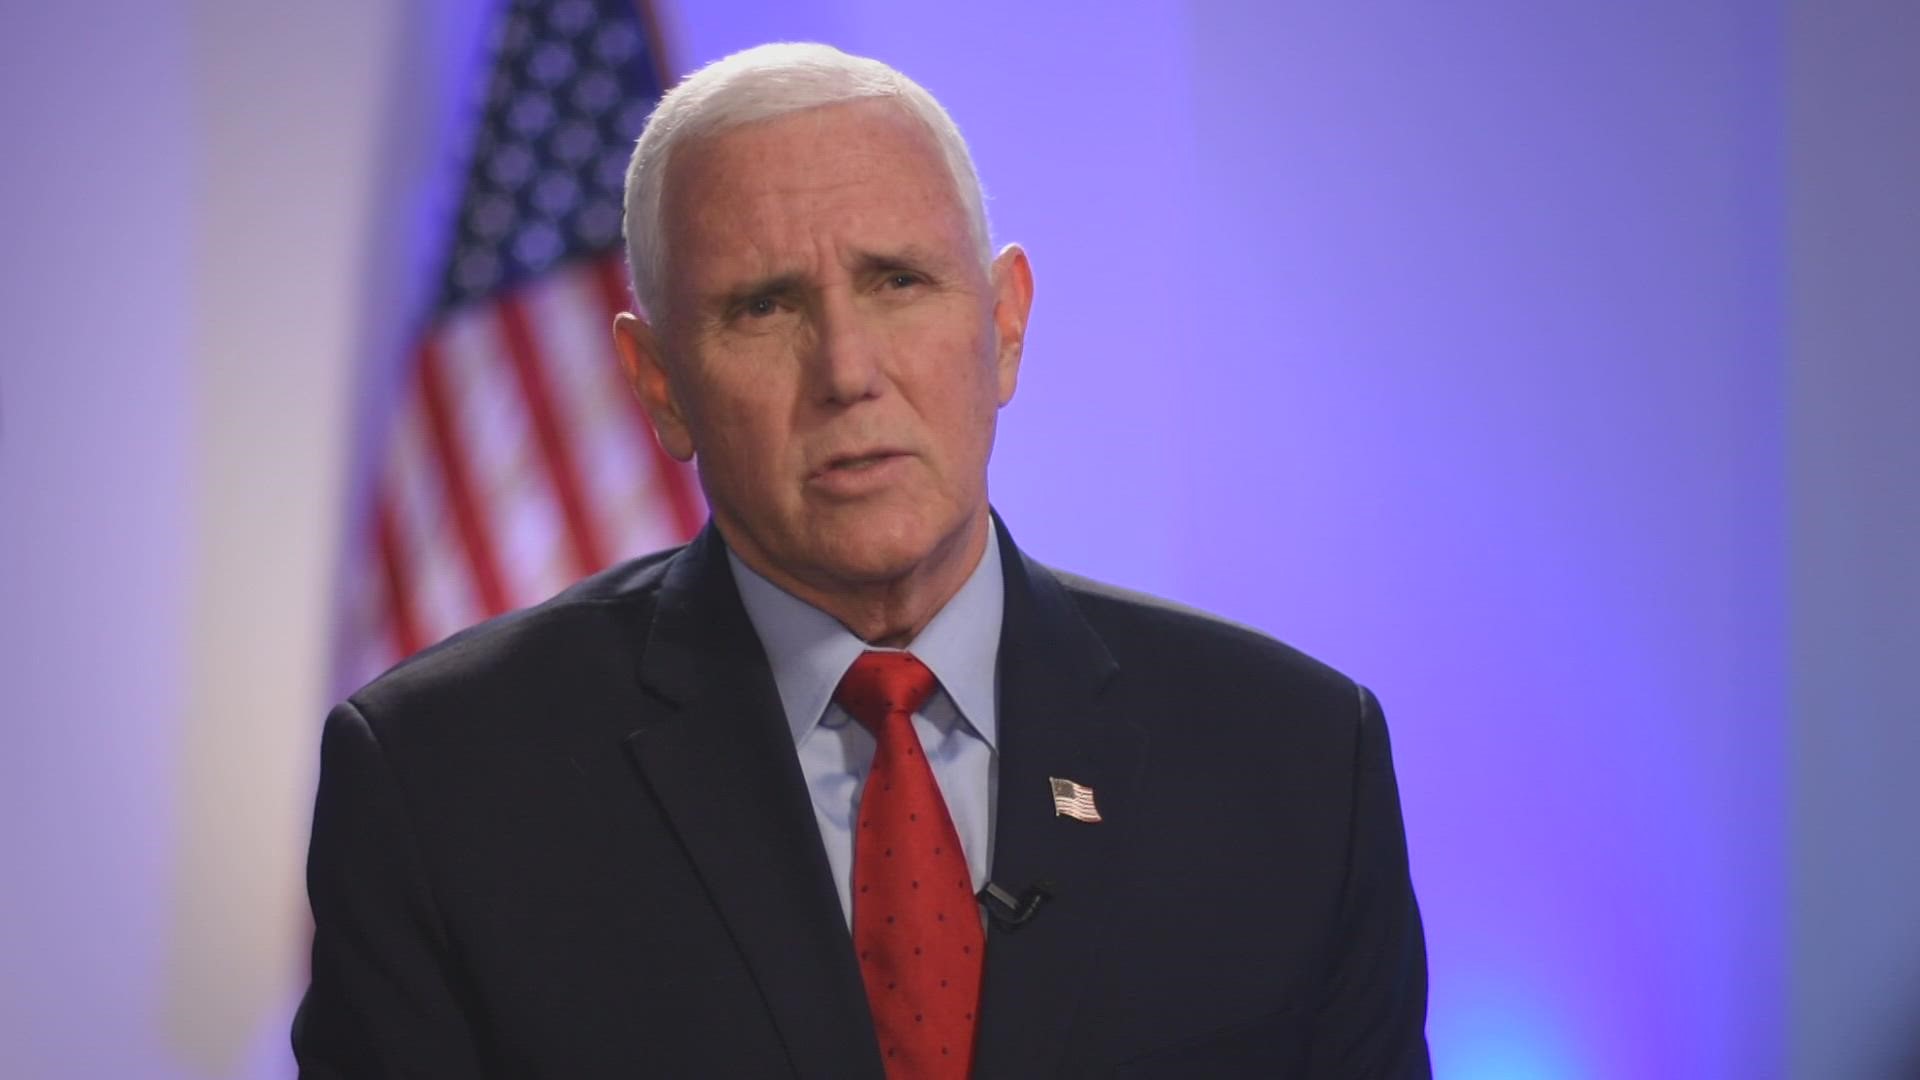 The New York Times is reporting the Justice Department wants to question former VicePresident Mike Pence in connection with its January 6th investigation.